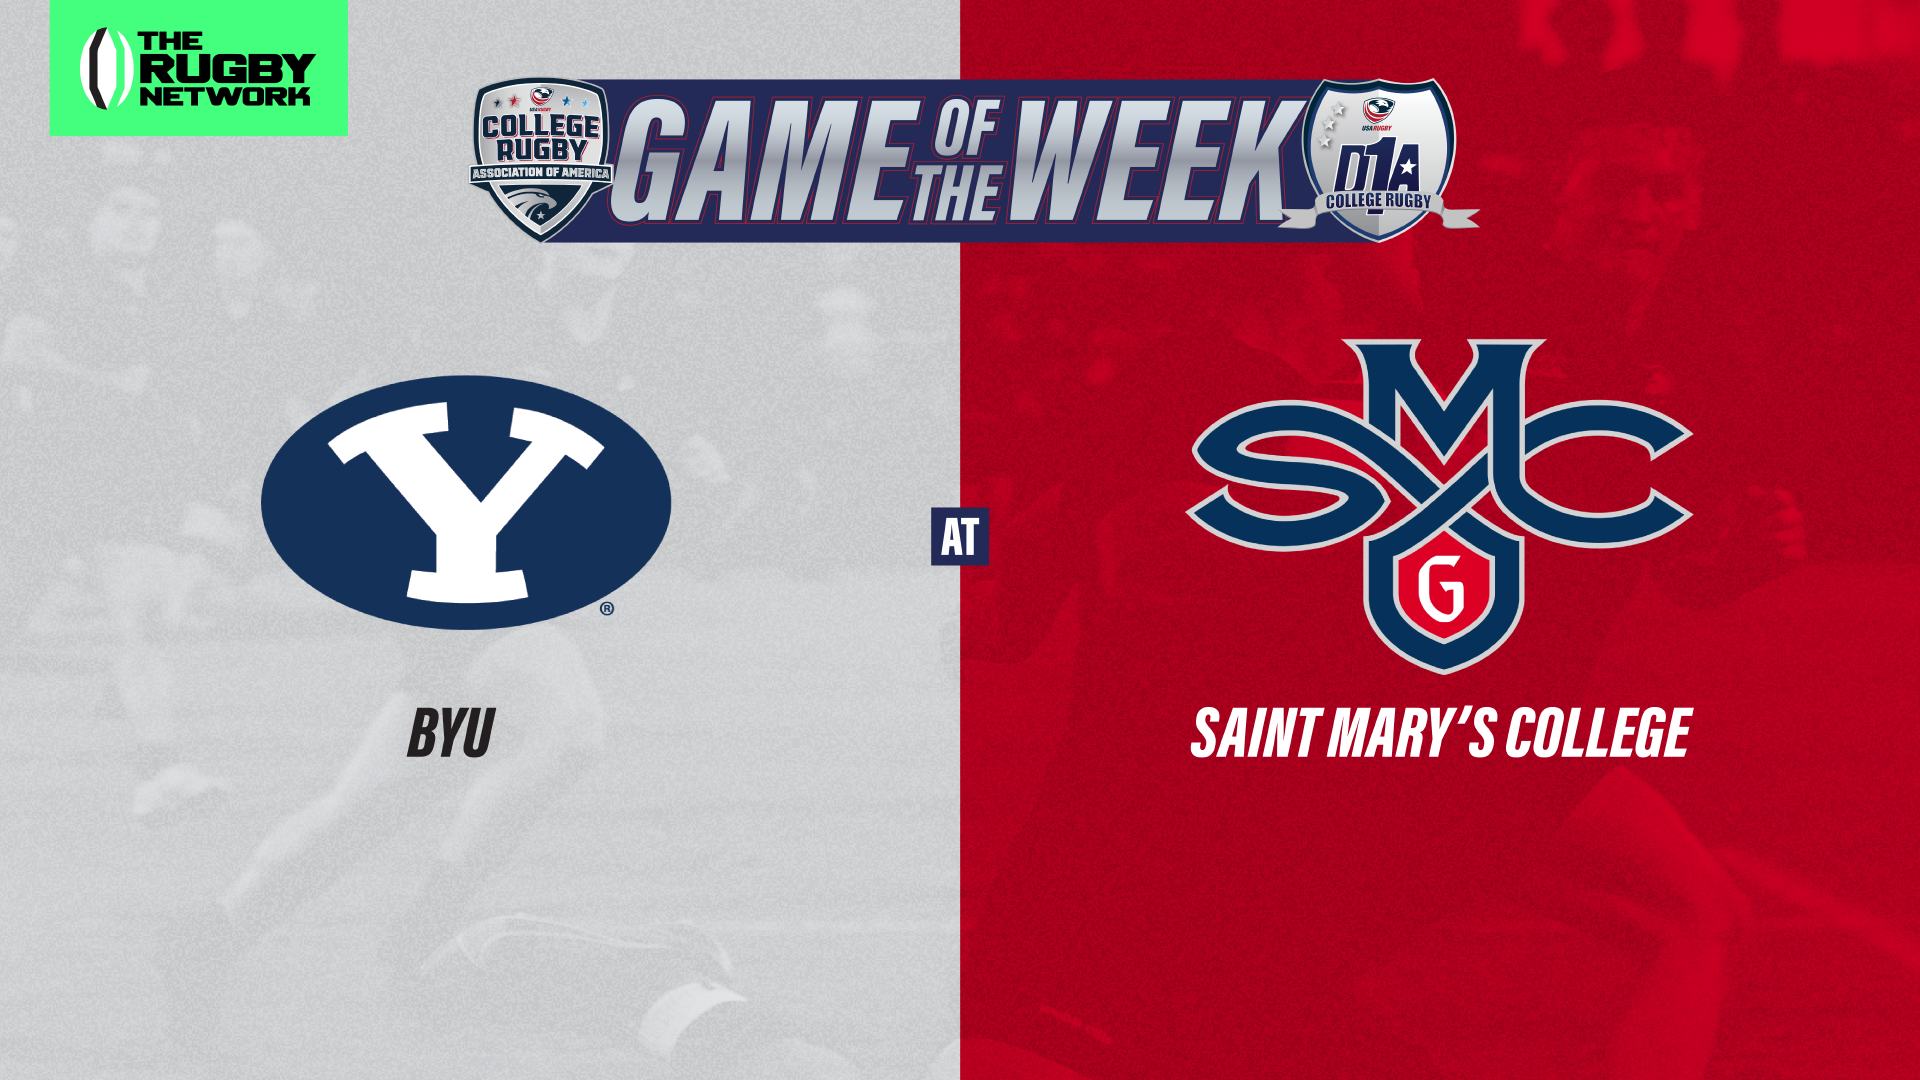 The Rugby Network D1A Game of the Week – 3/4/23 BYU @ Saint Mary’s College